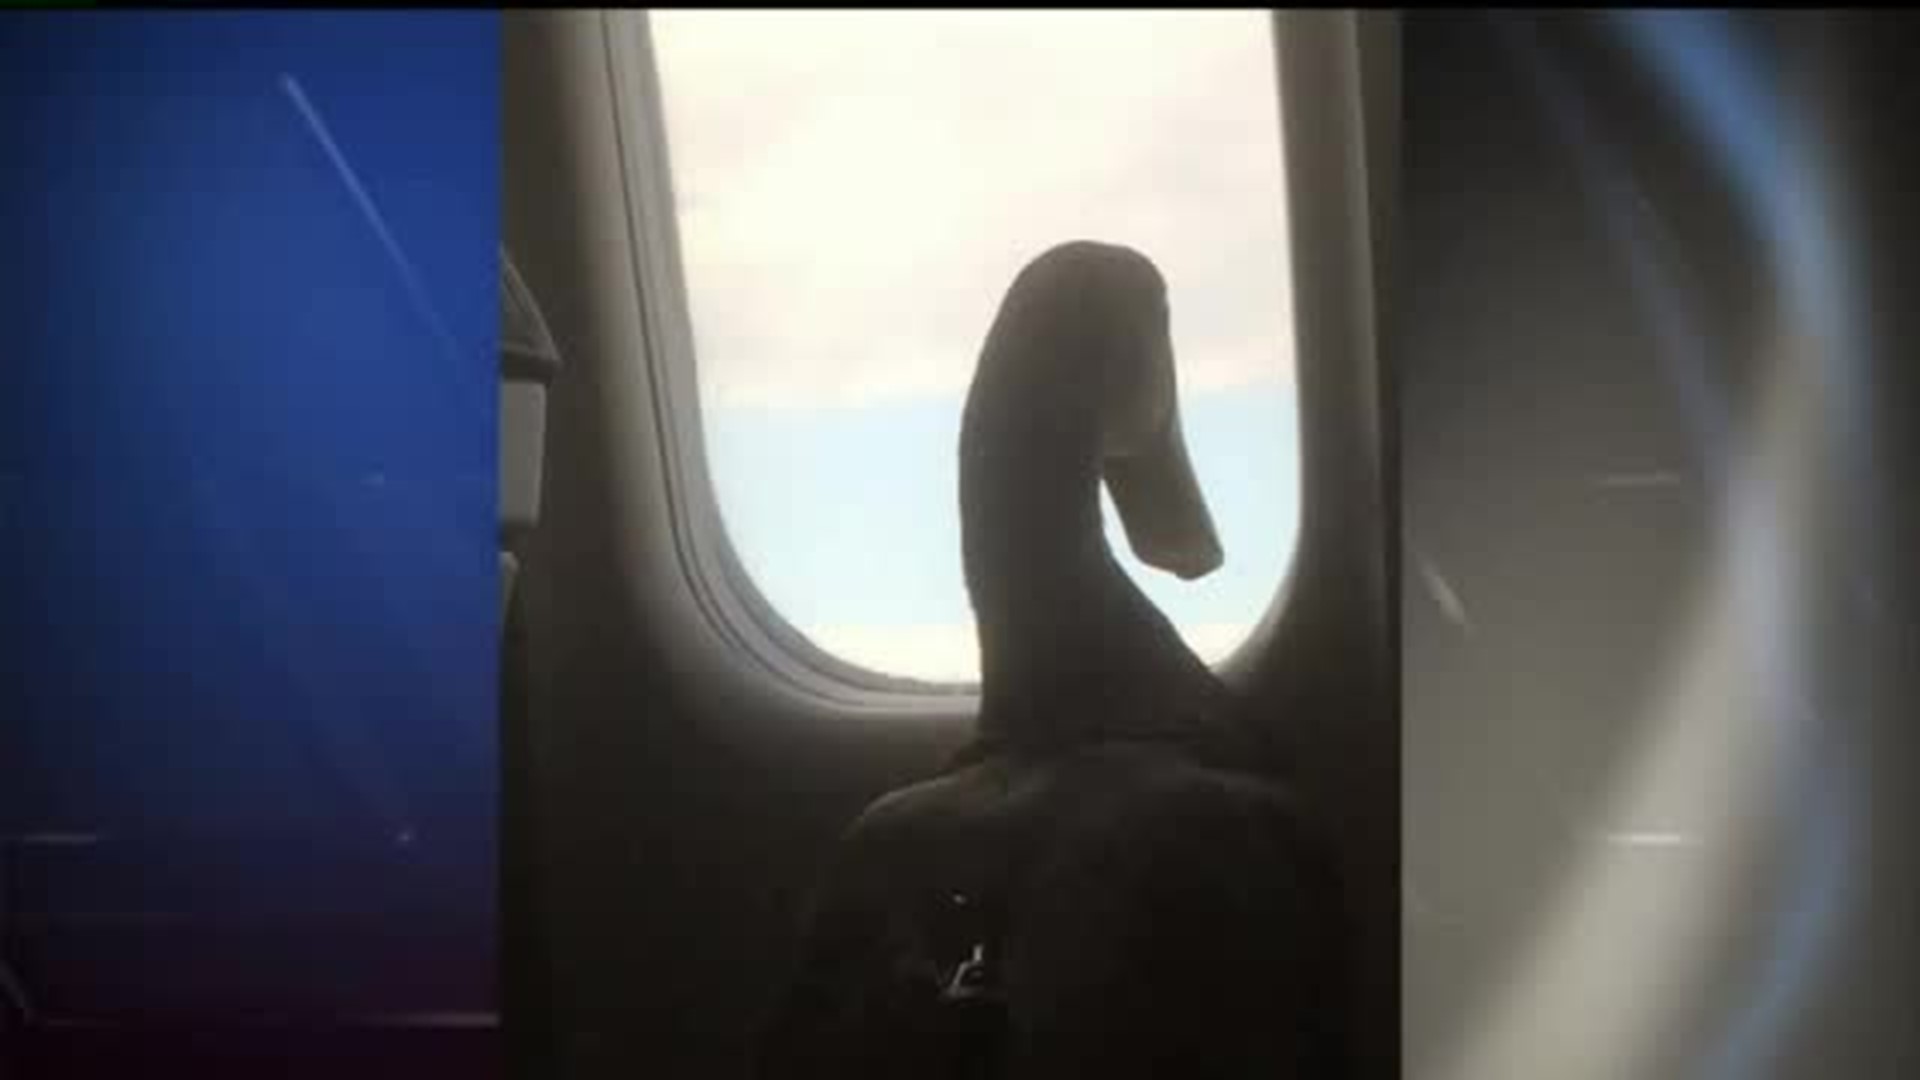 Service duck awes passengers on airplane